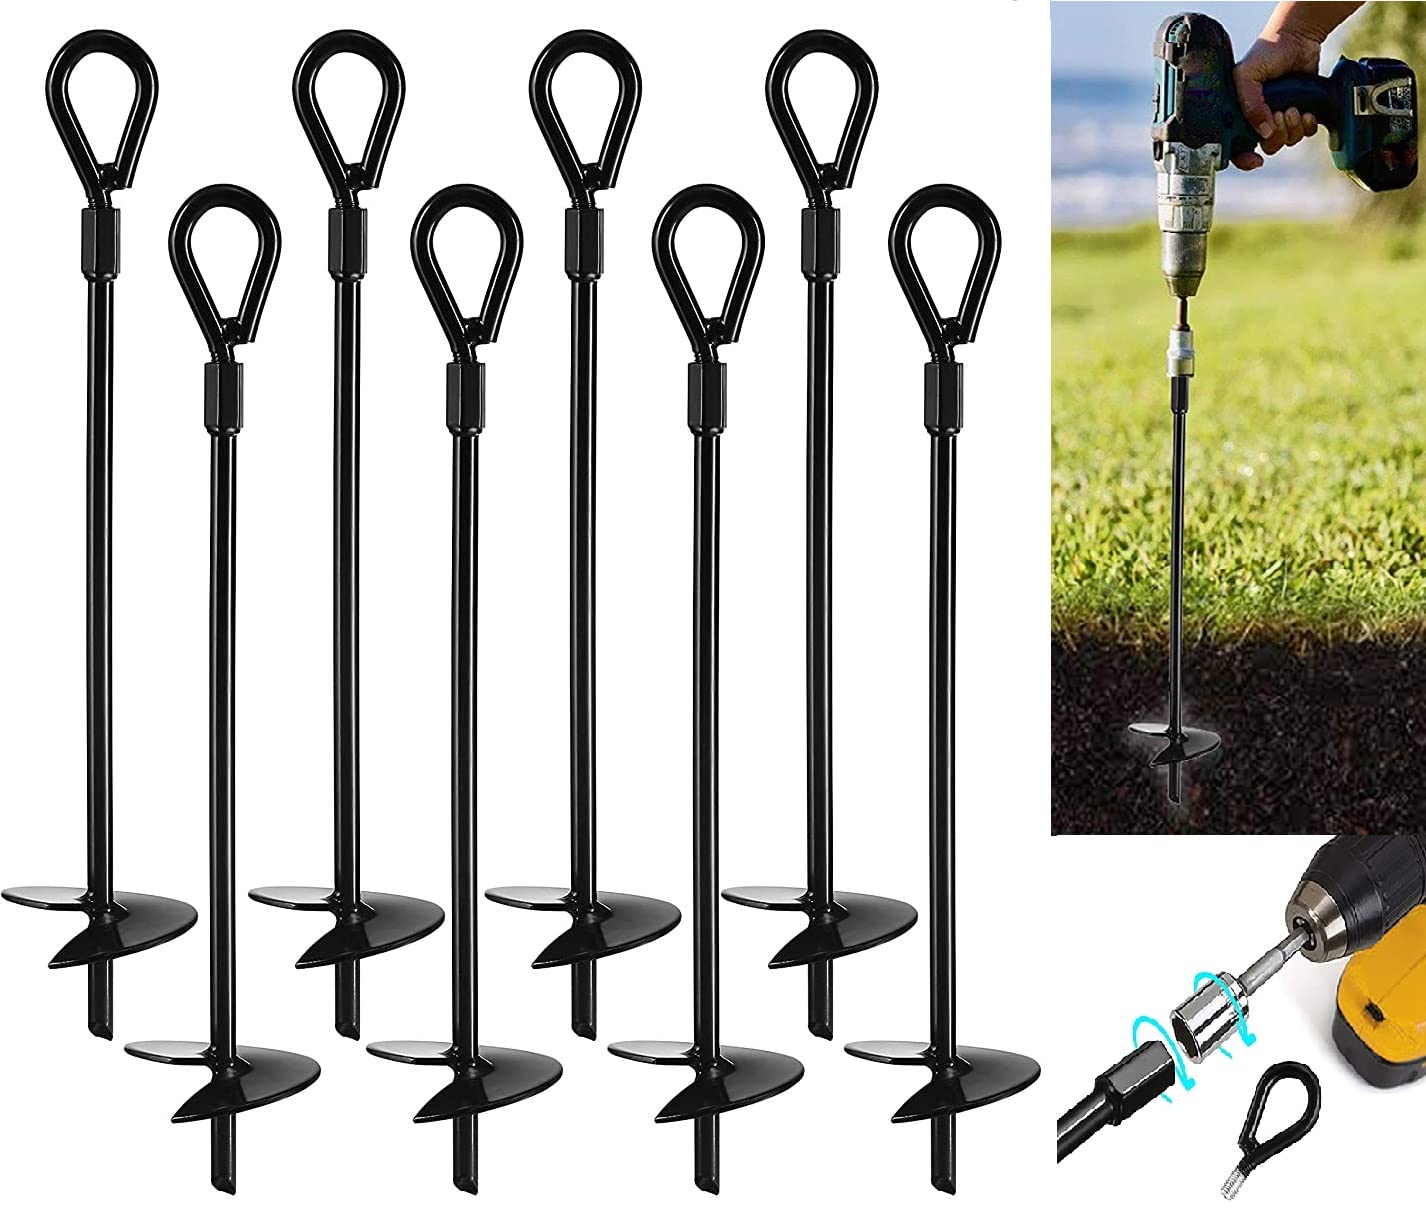 Vasgor 20A Ground Anchors (8Pcs) Easy To Use With Drill, 3 Helix Diameter, Heavy Duty Anchor Hook For Camping Tent, Canopies, Ca